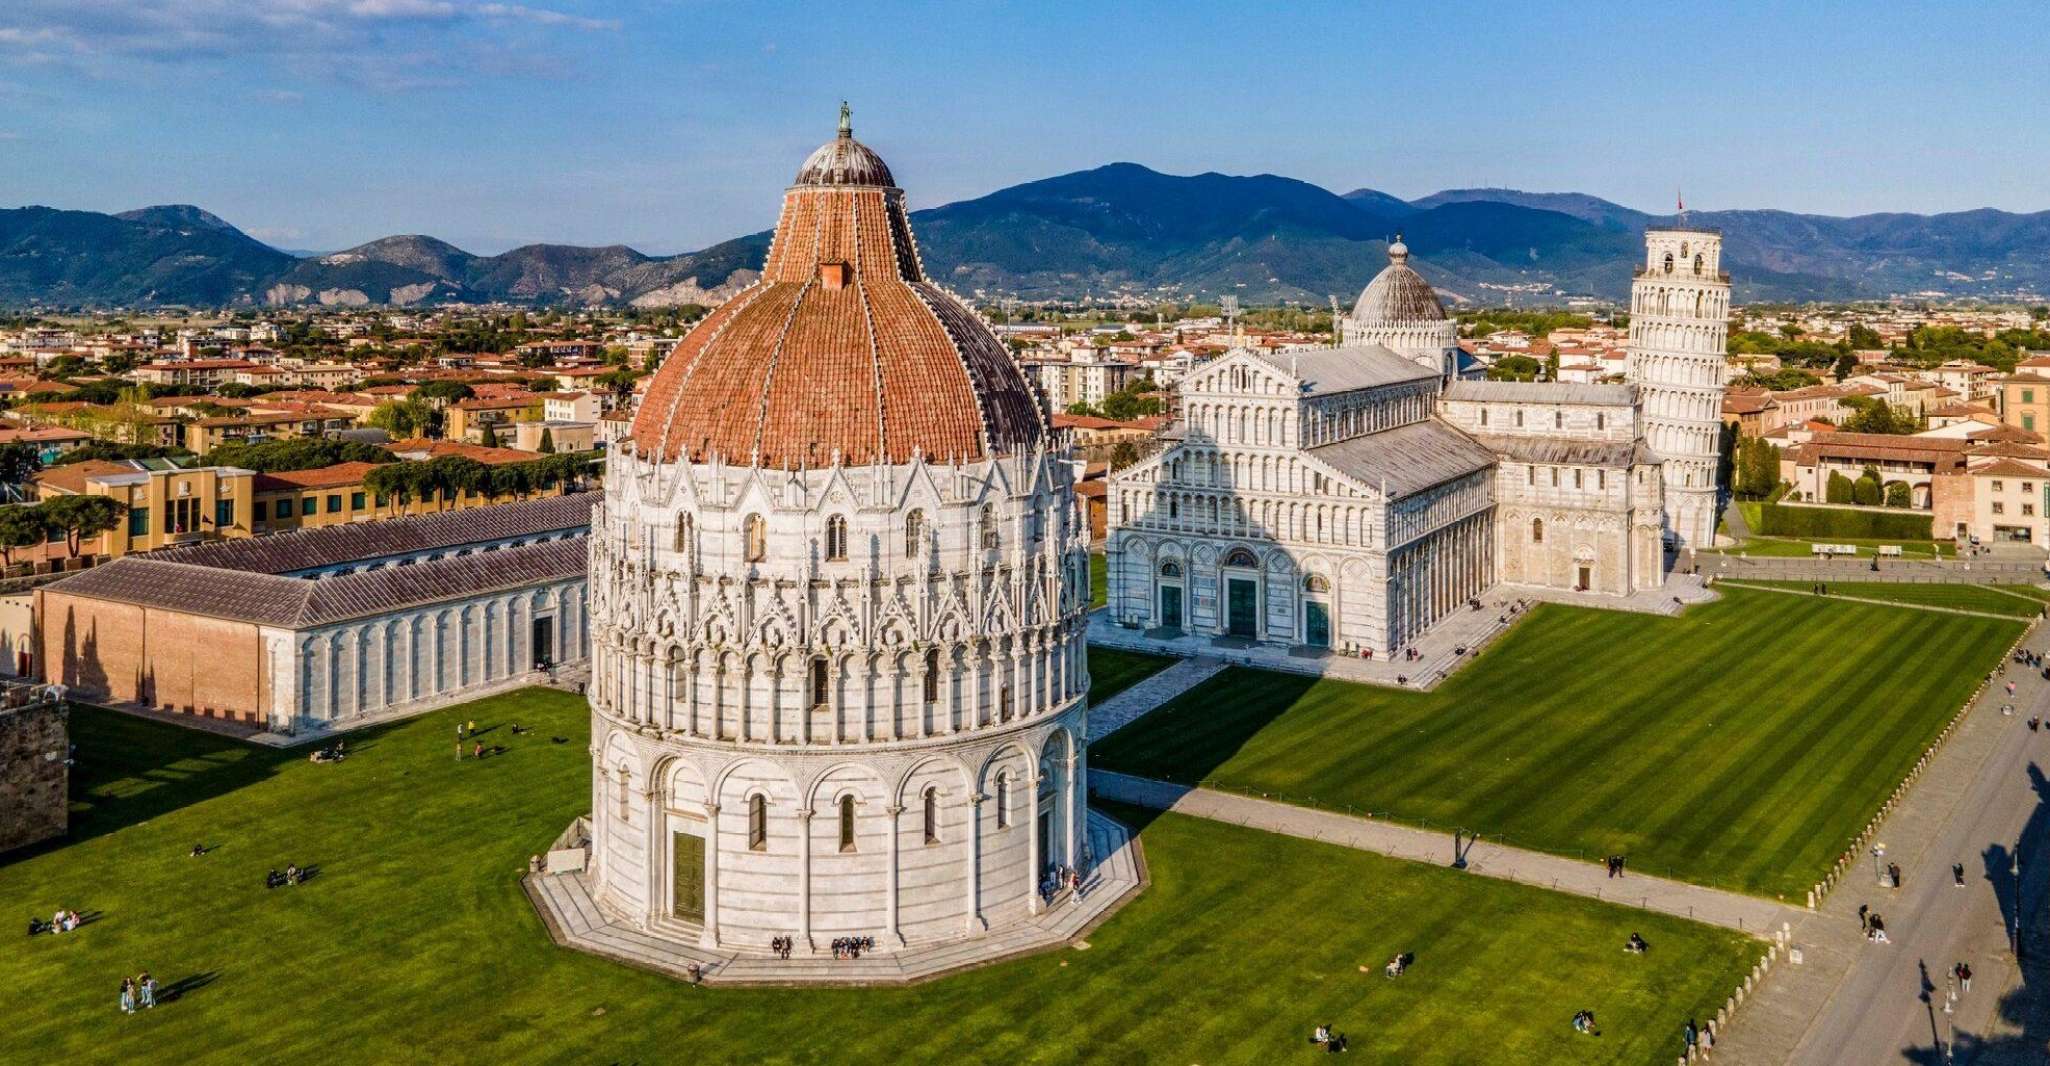 Pisa, 5 Attractions Ticket with Skip-the-Line & Audio Guide - Housity